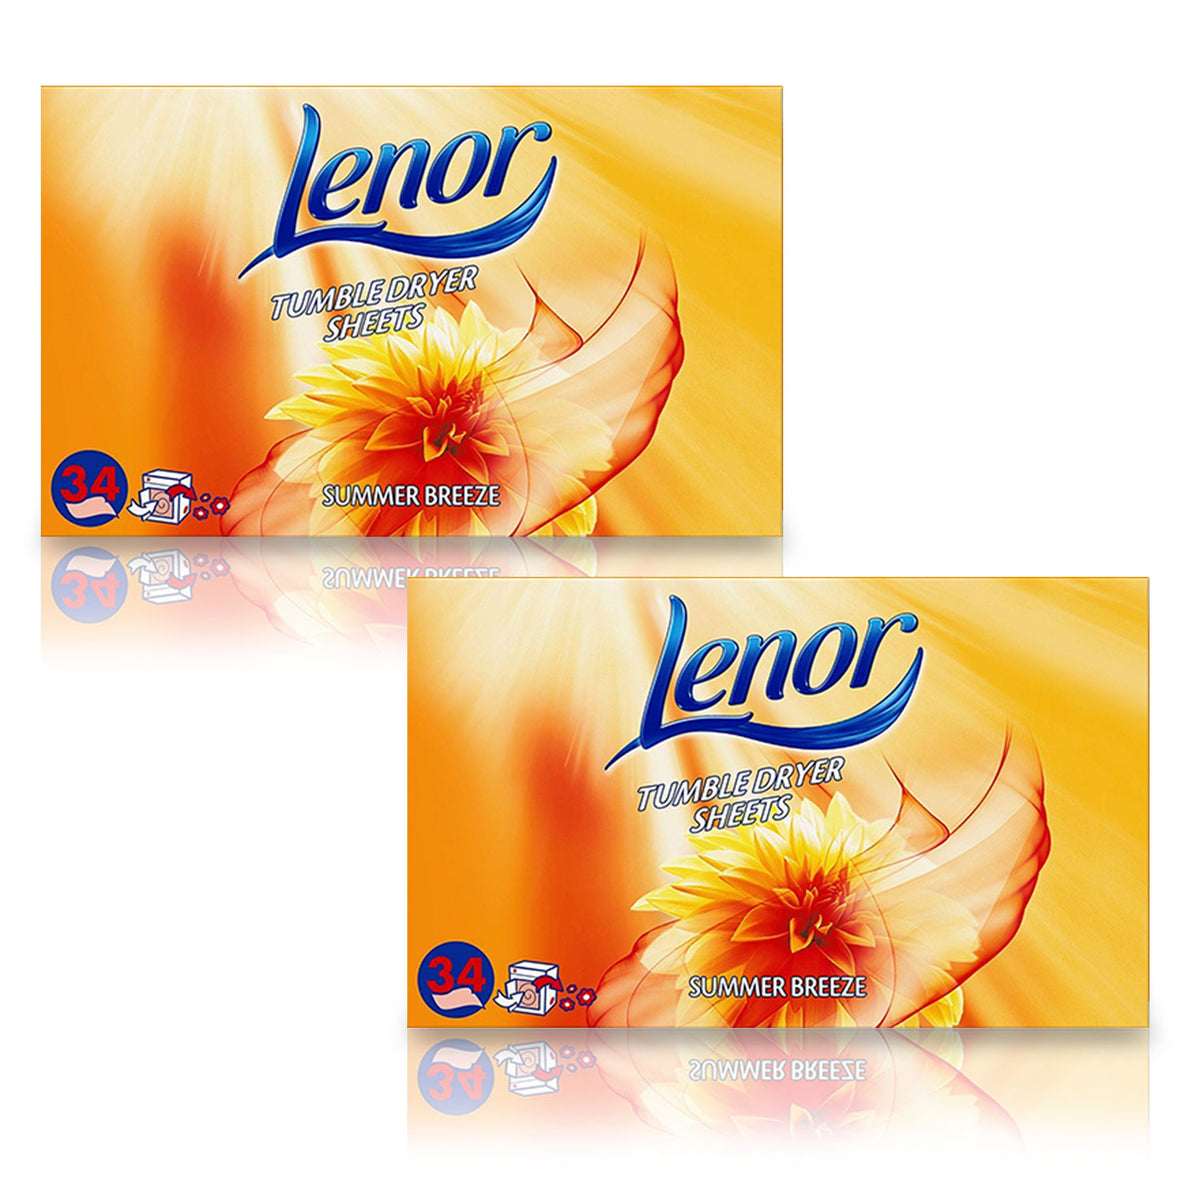 Details about   Lenor Tumble Dryer Sheets Freshen Laundry Washing Summer Breeze & Spring 